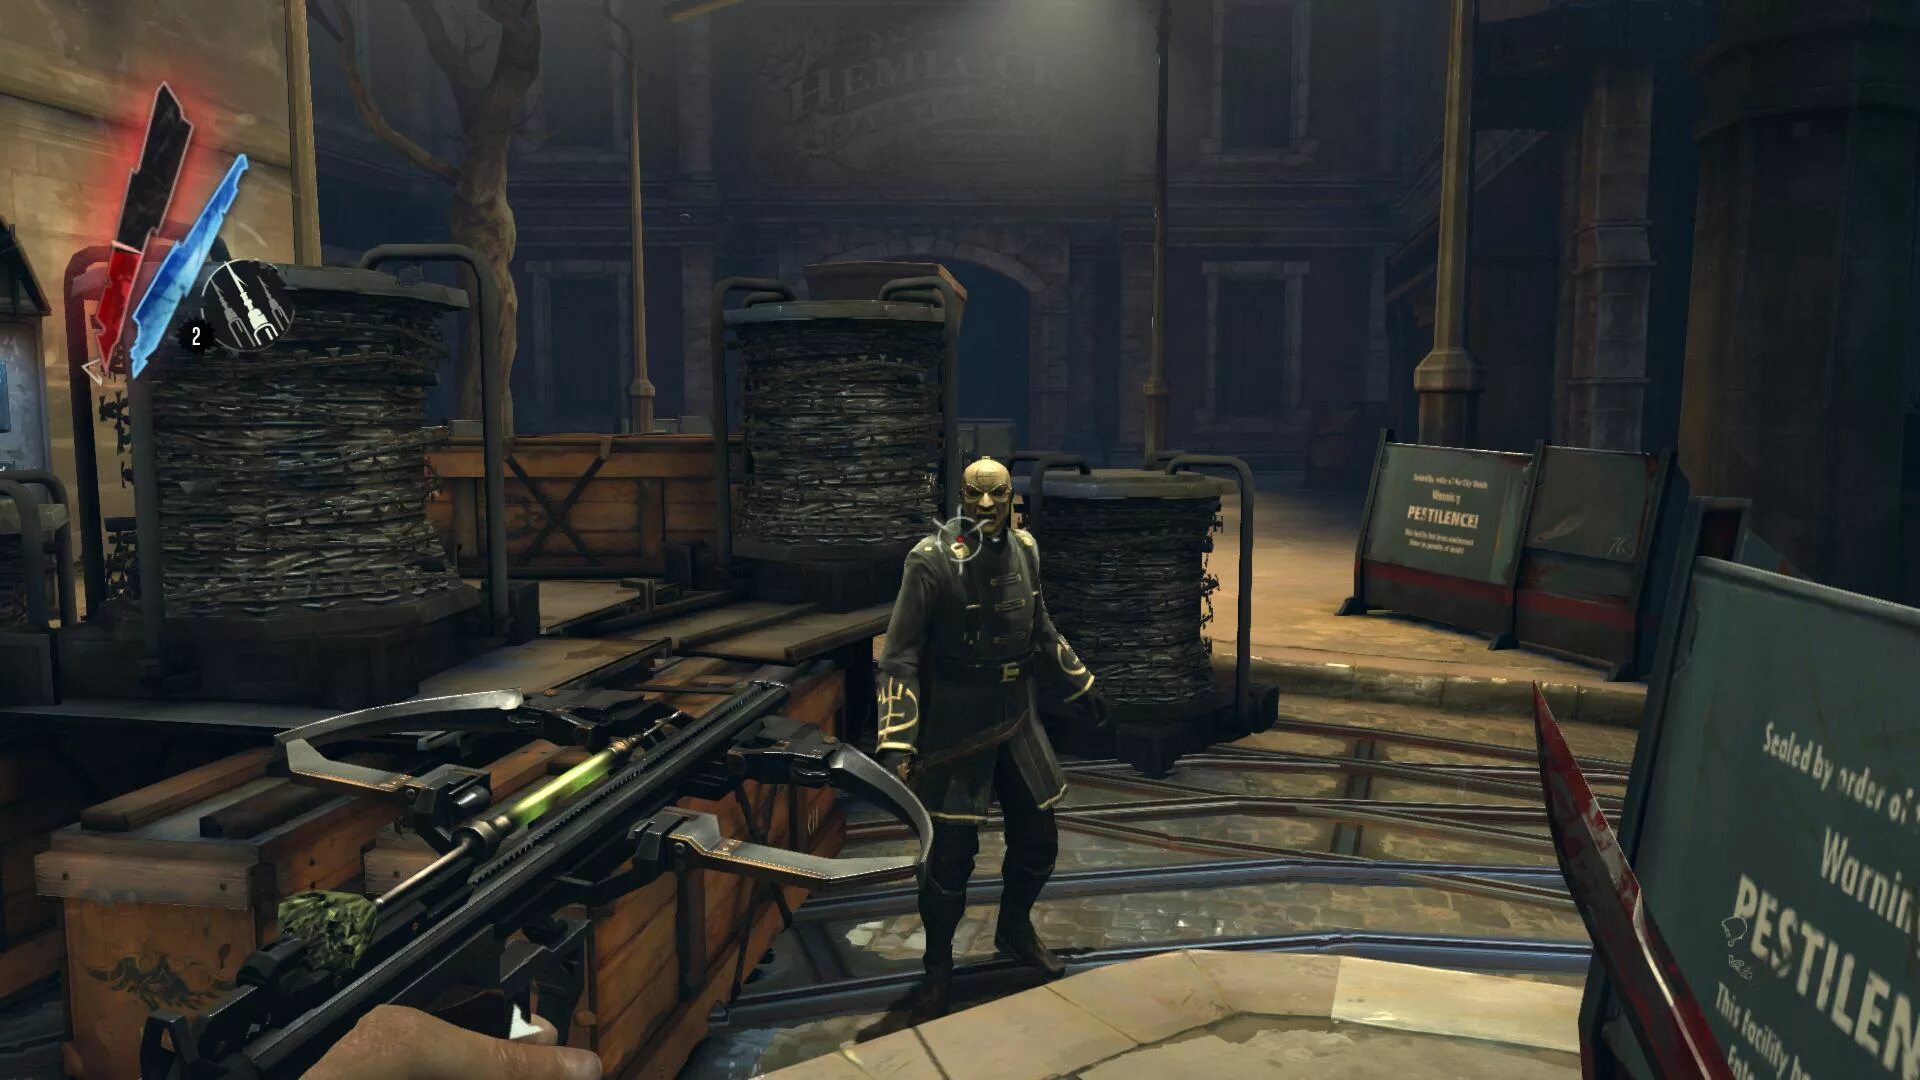 Игра Dishonored 1. Dishonored (ps3). [Ps3] Dishonored [Rus] (2012). Dishonored 2012 игра. Игры game of the year edition